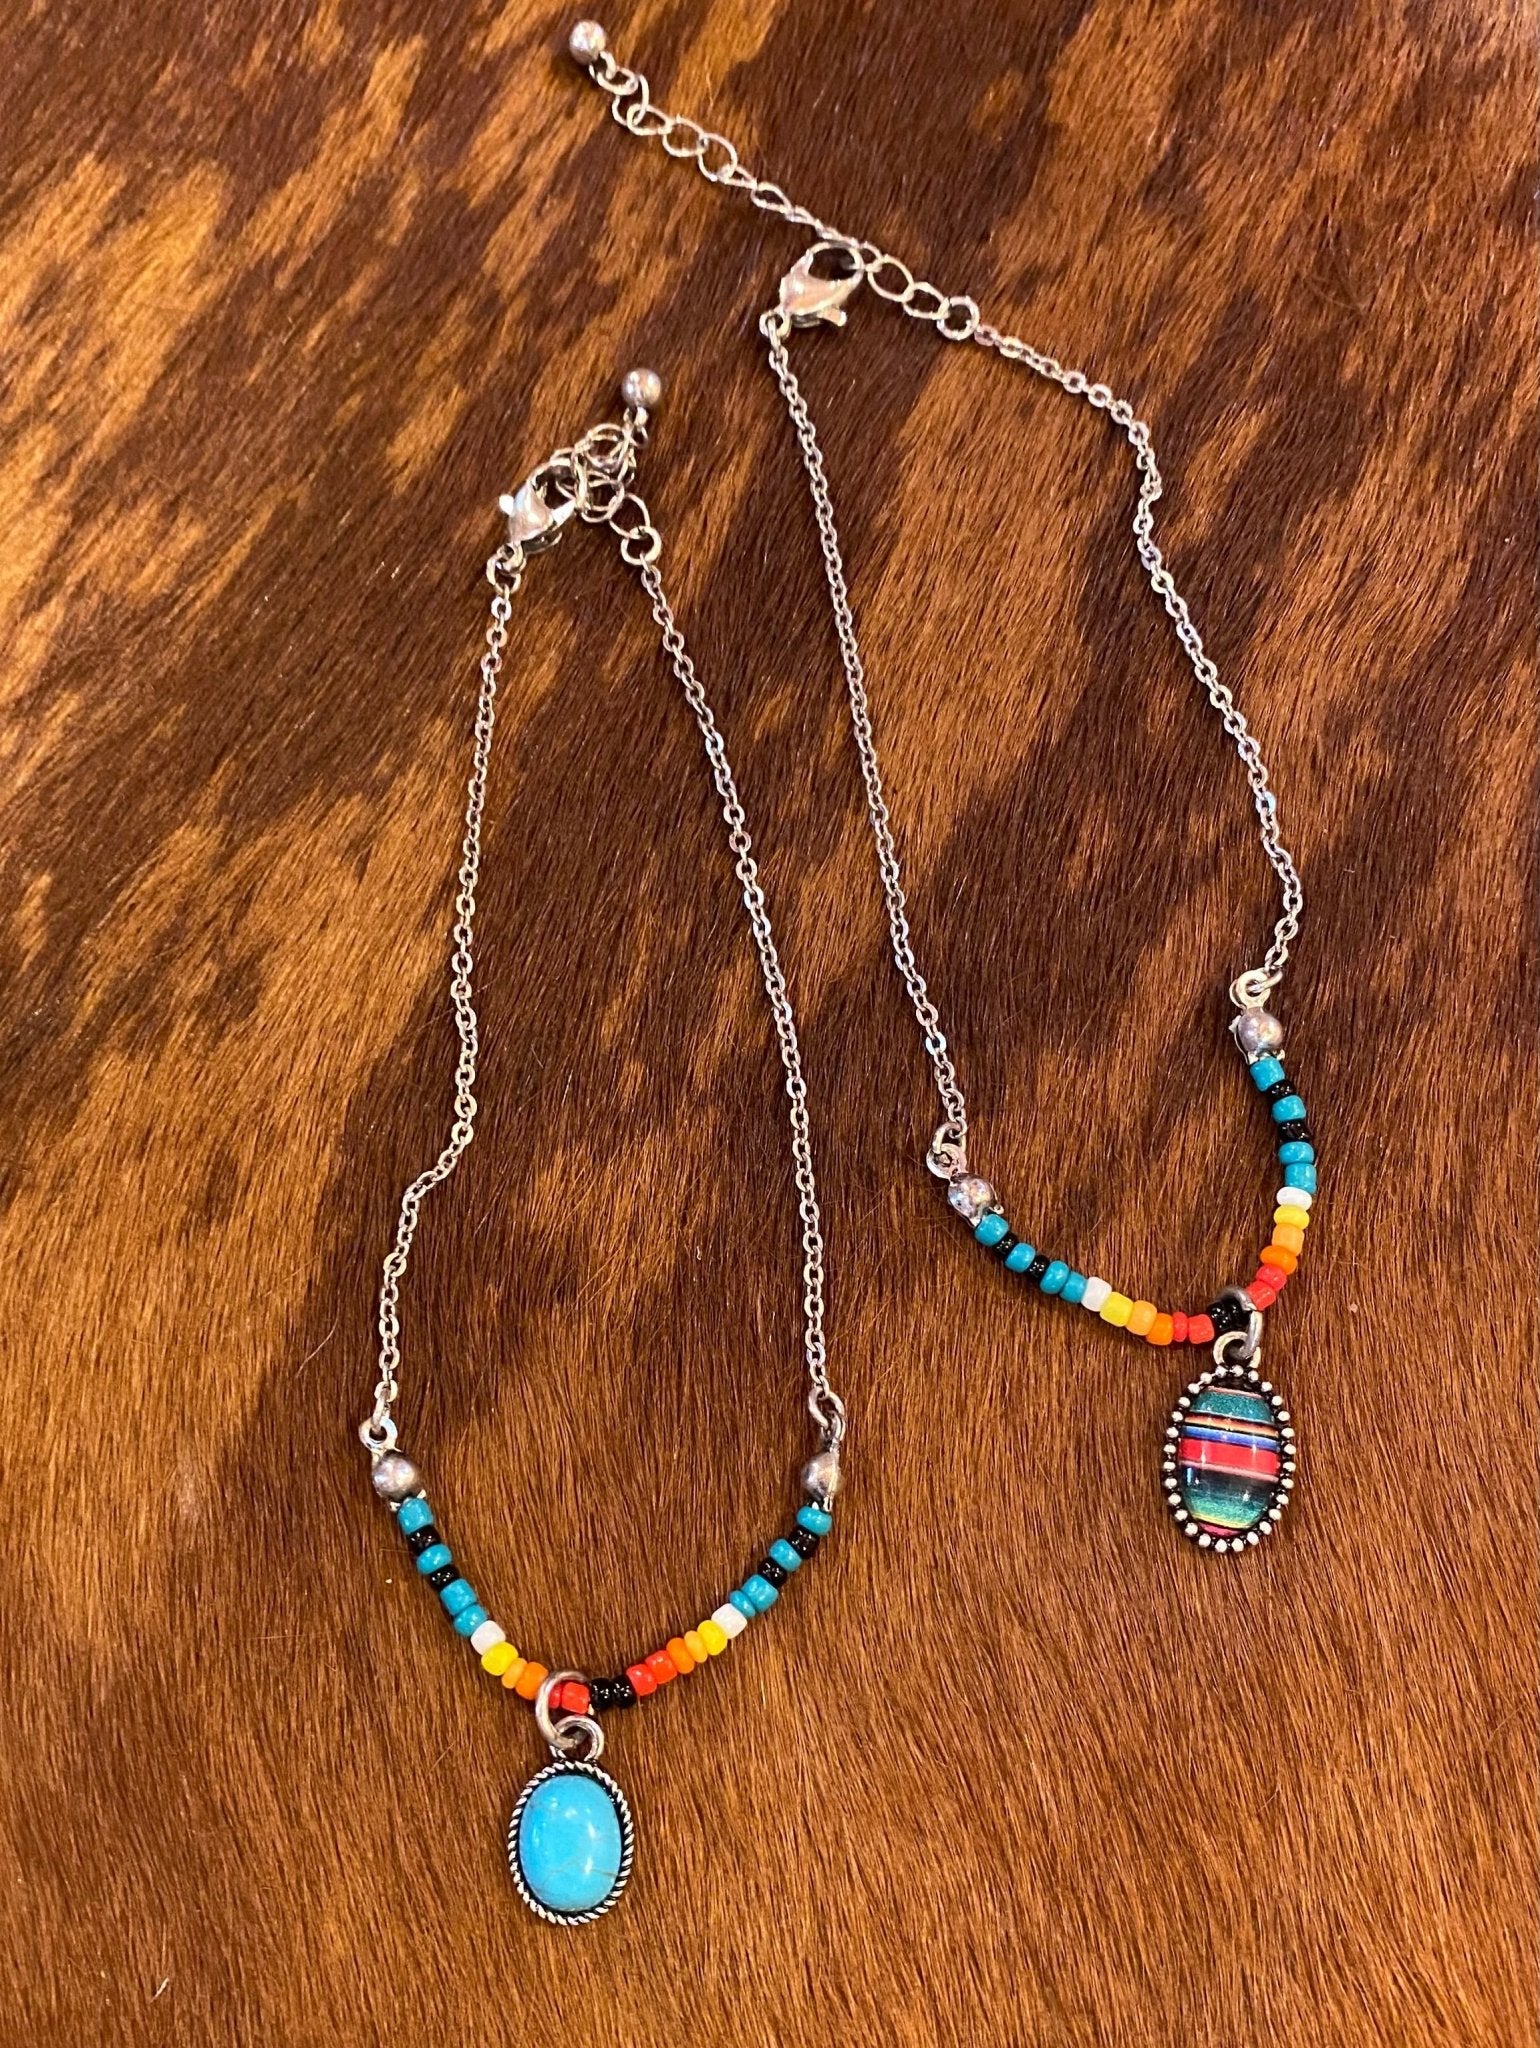 The Ruidoso Beaded Anklet